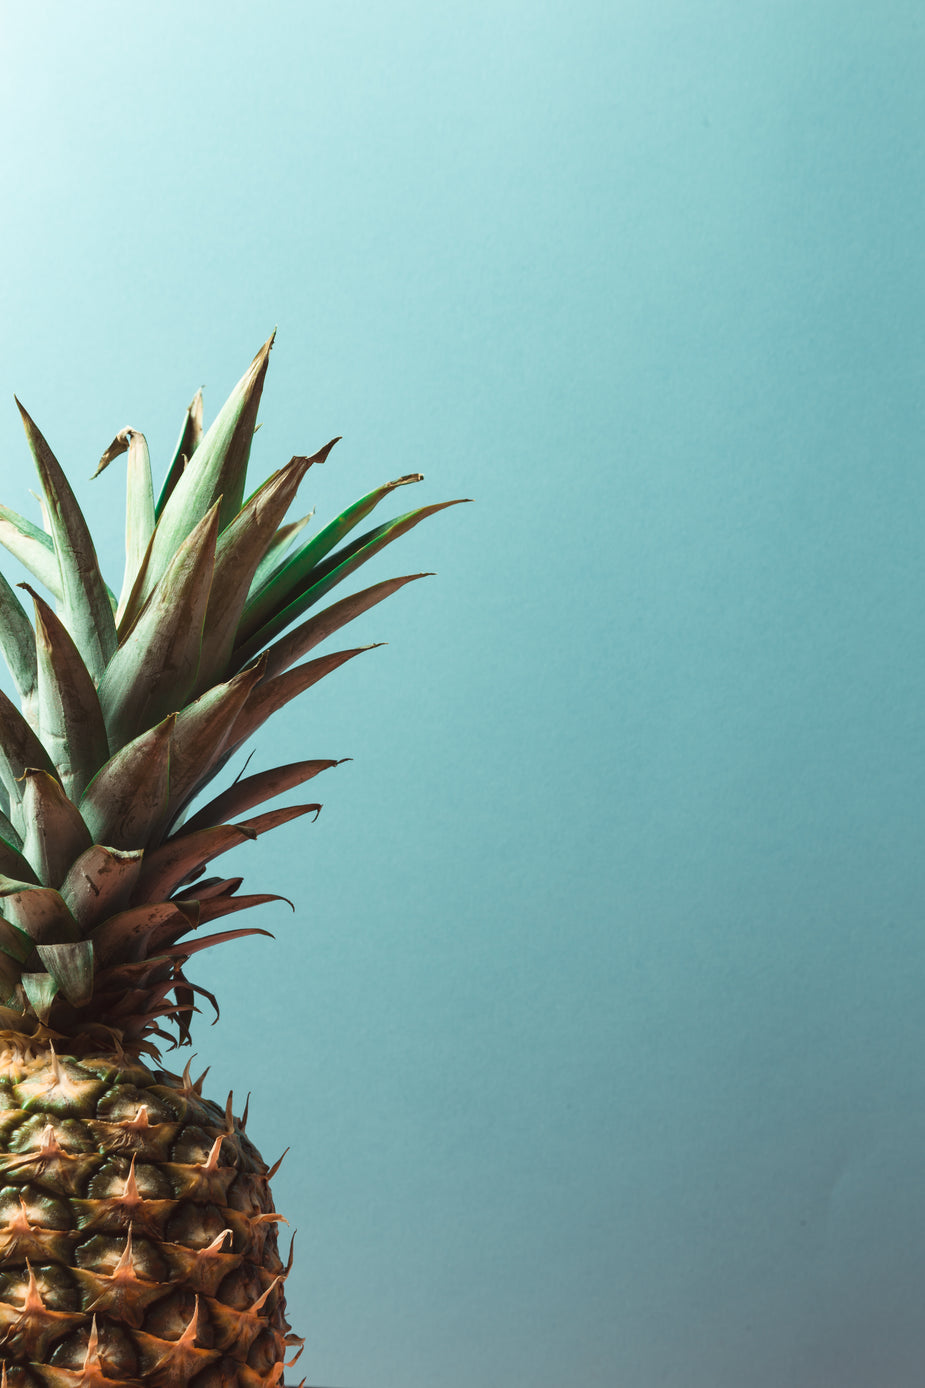 Browse Free HD Images of Ripe Pineapple Sits Against A Blue Background